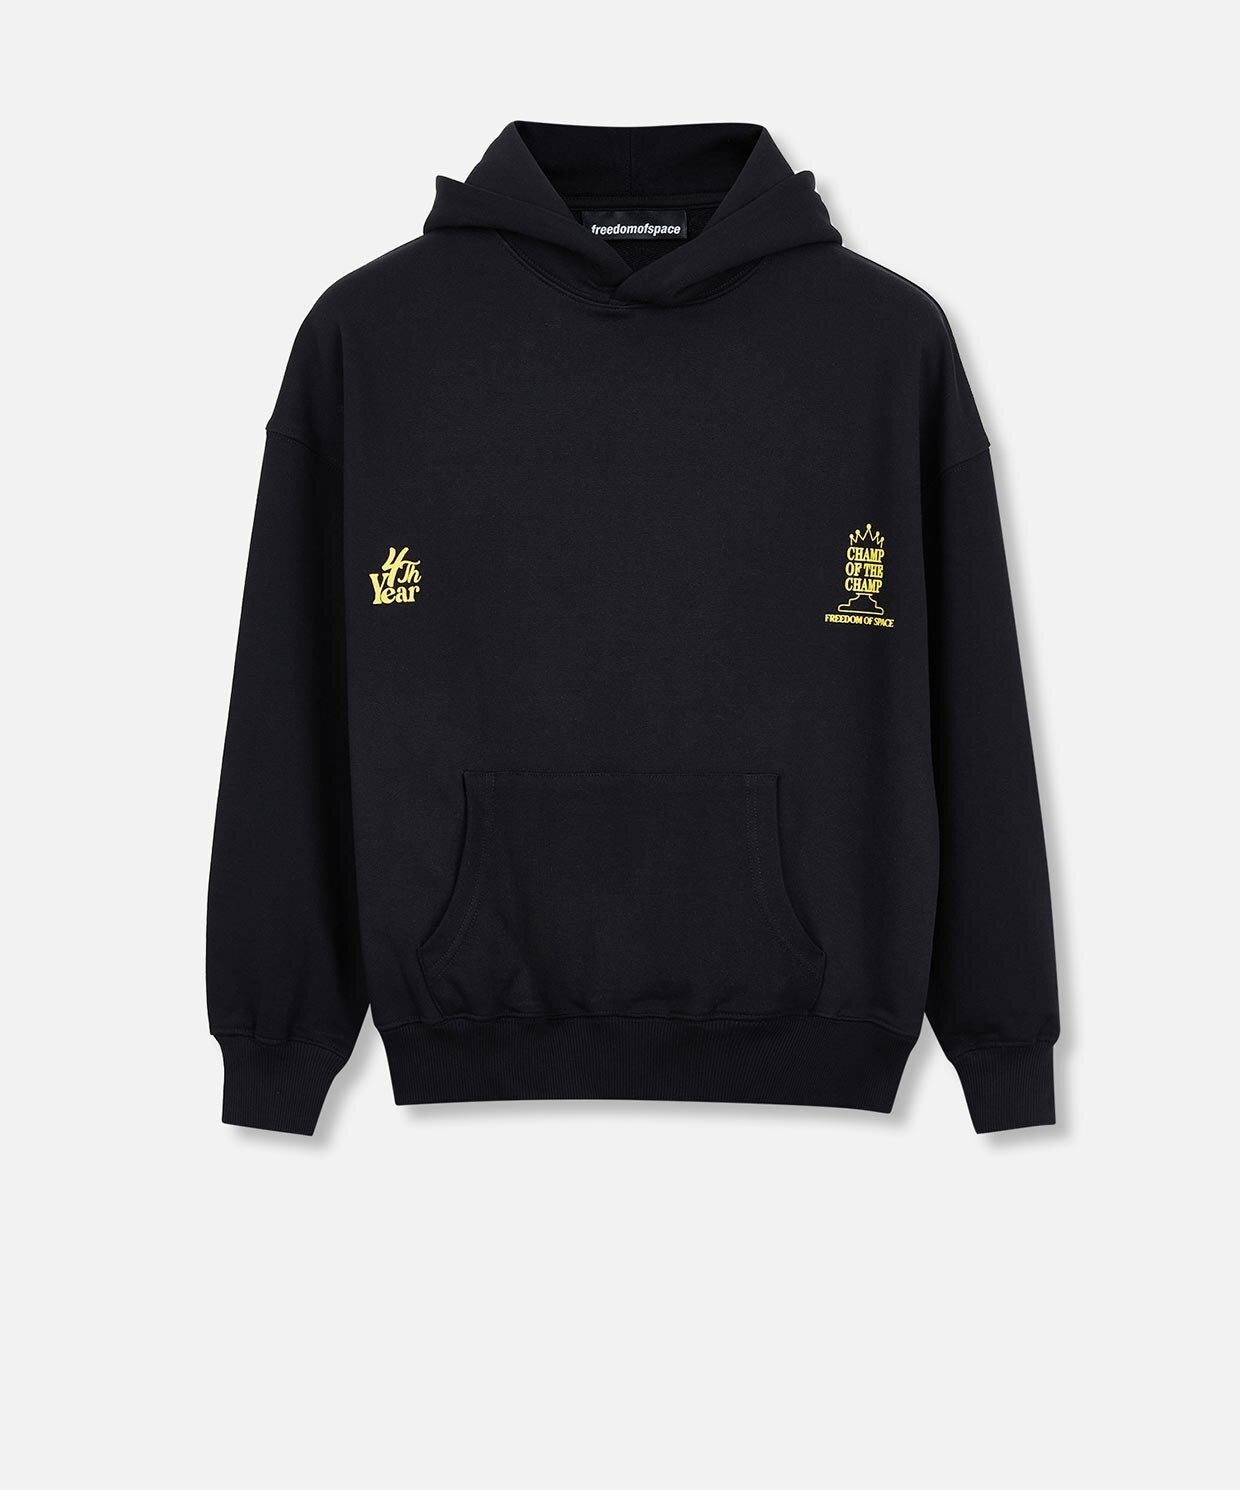 resm Freedom Of Space World Champion Hoodie